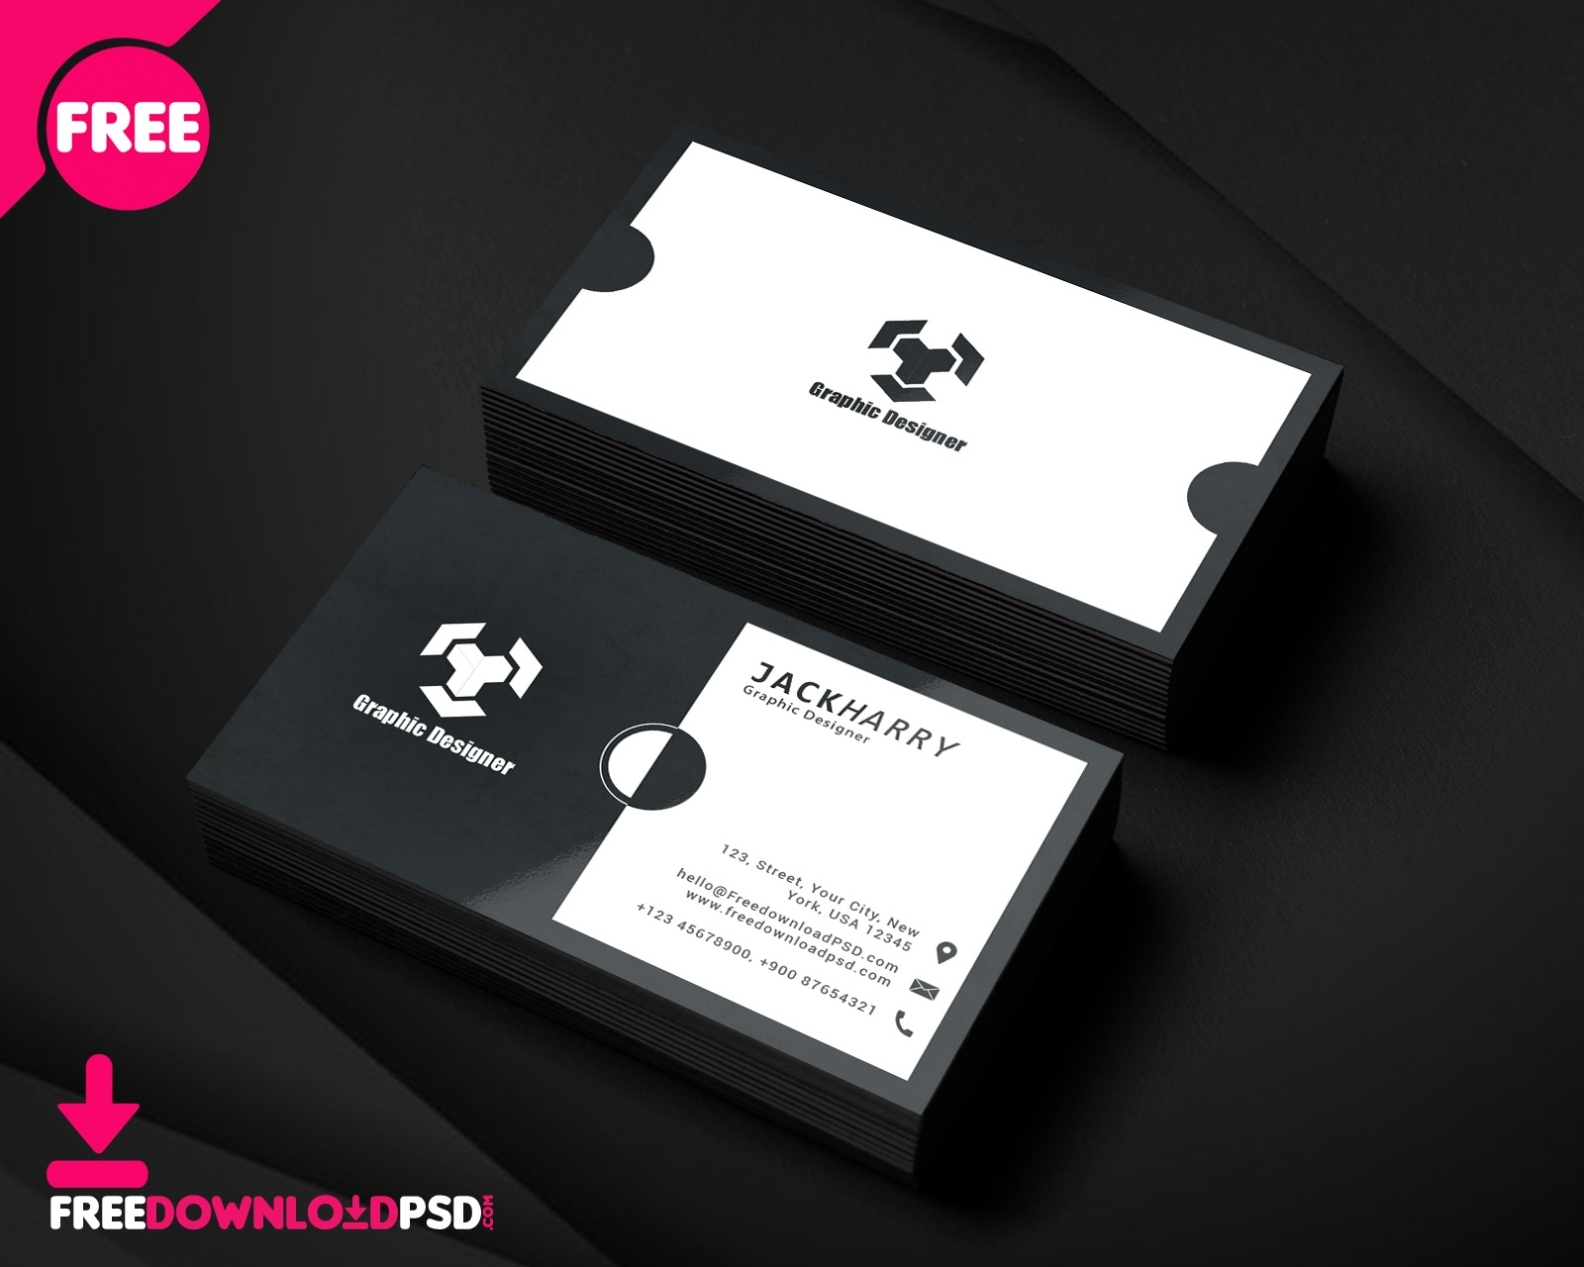 Modern Graphic Designer Business Card Psd Template | Freedownloadpsd With Regard To Business Card Size Psd Template